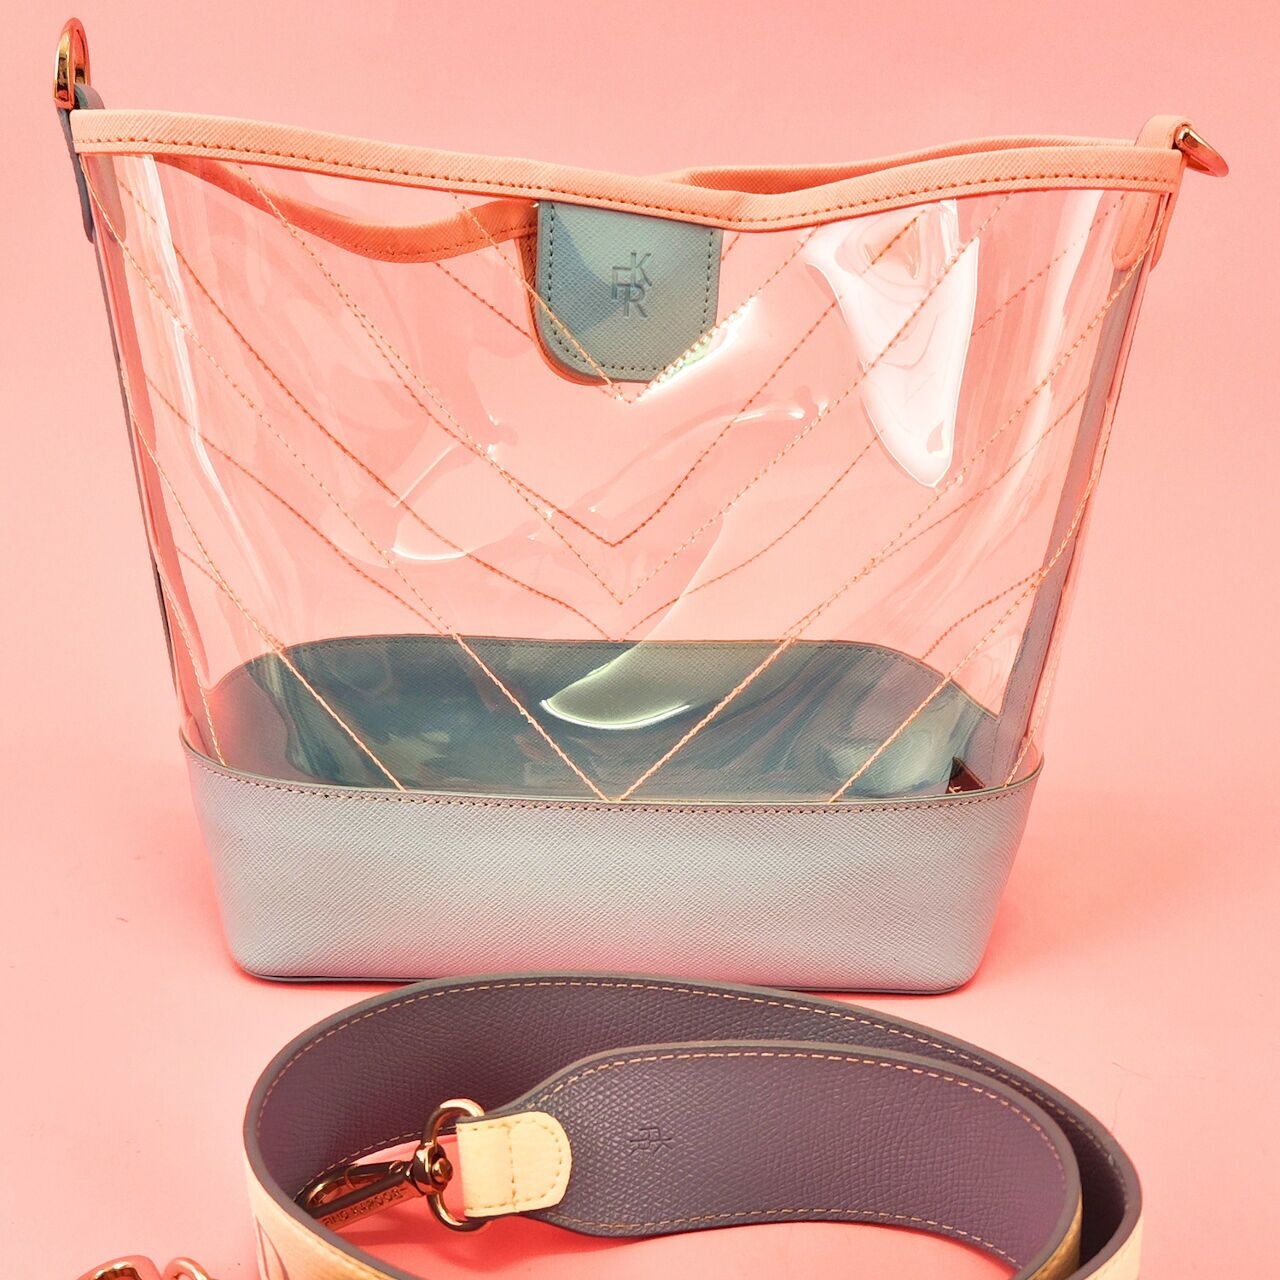 Find Kapoor Pingo Summer Clear Bag